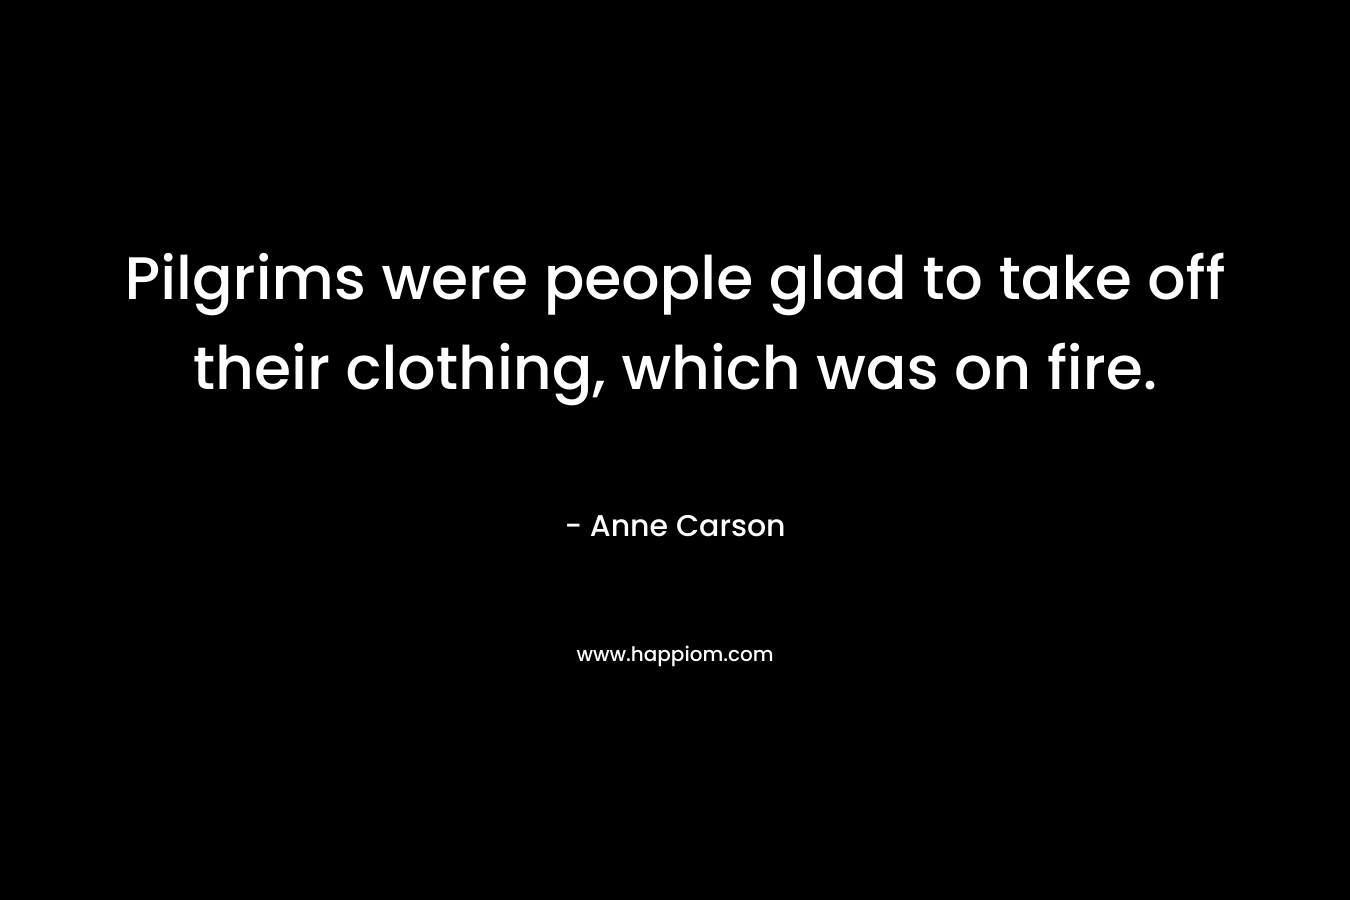 Pilgrims were people glad to take off their clothing, which was on fire. – Anne Carson